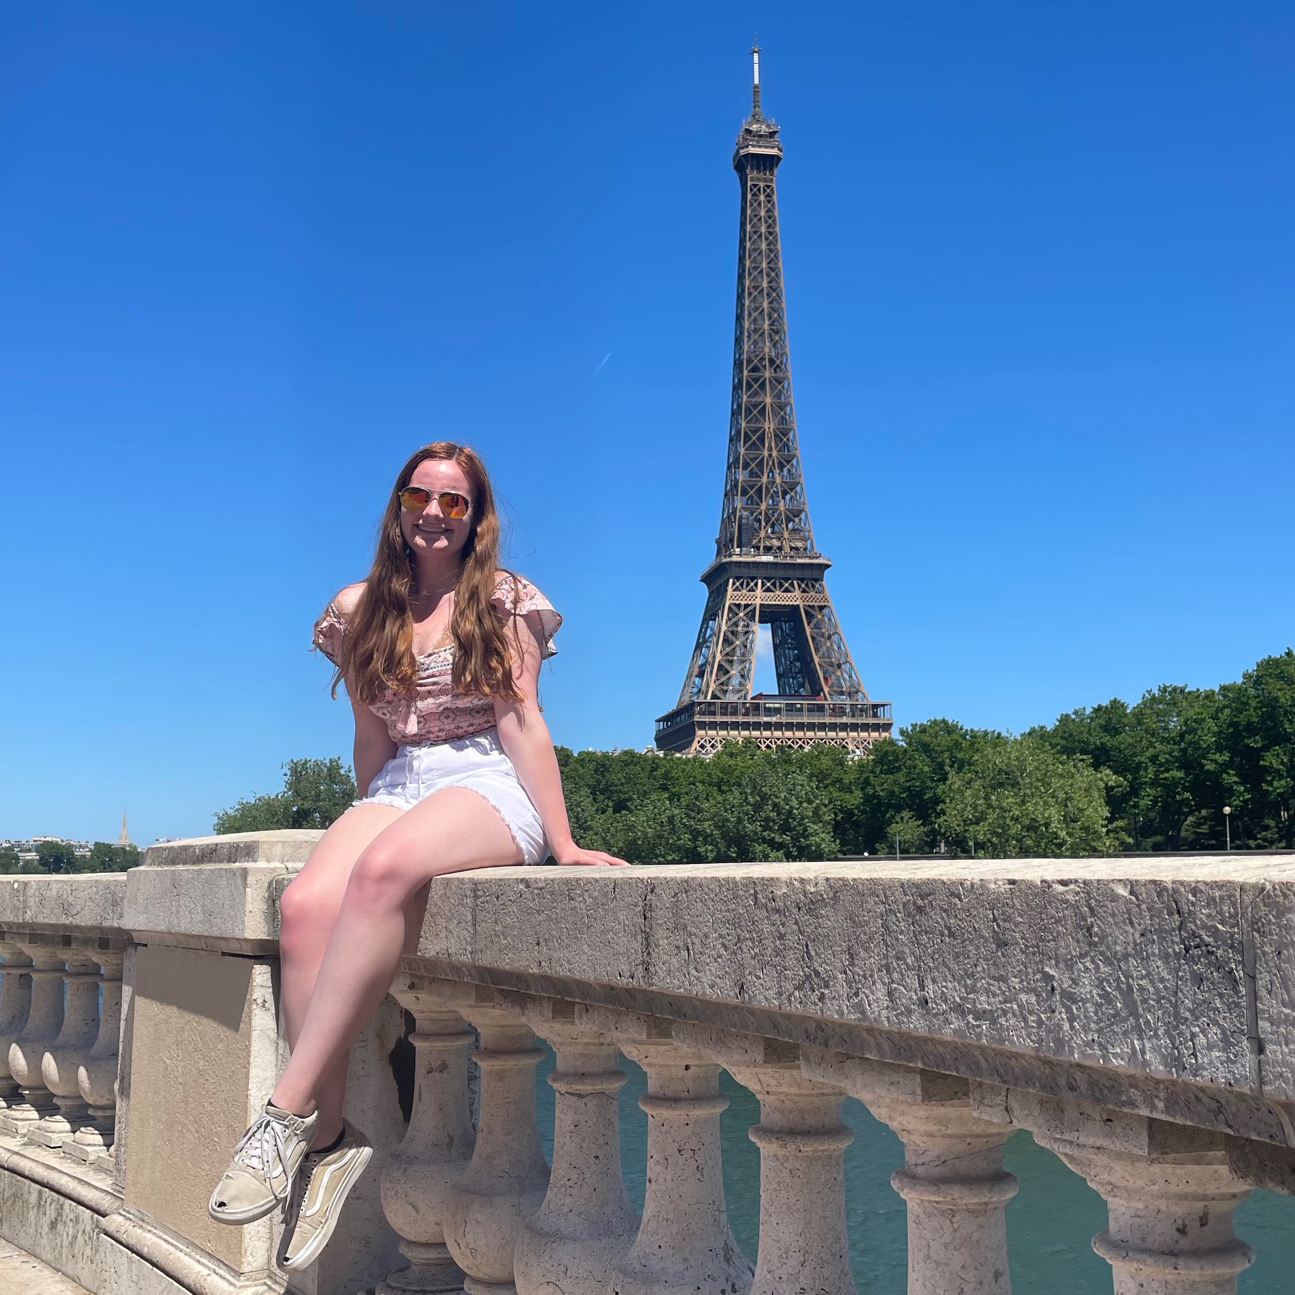 Hannah sits on a low concrete wall. The Eiffel Tower is visible in the background